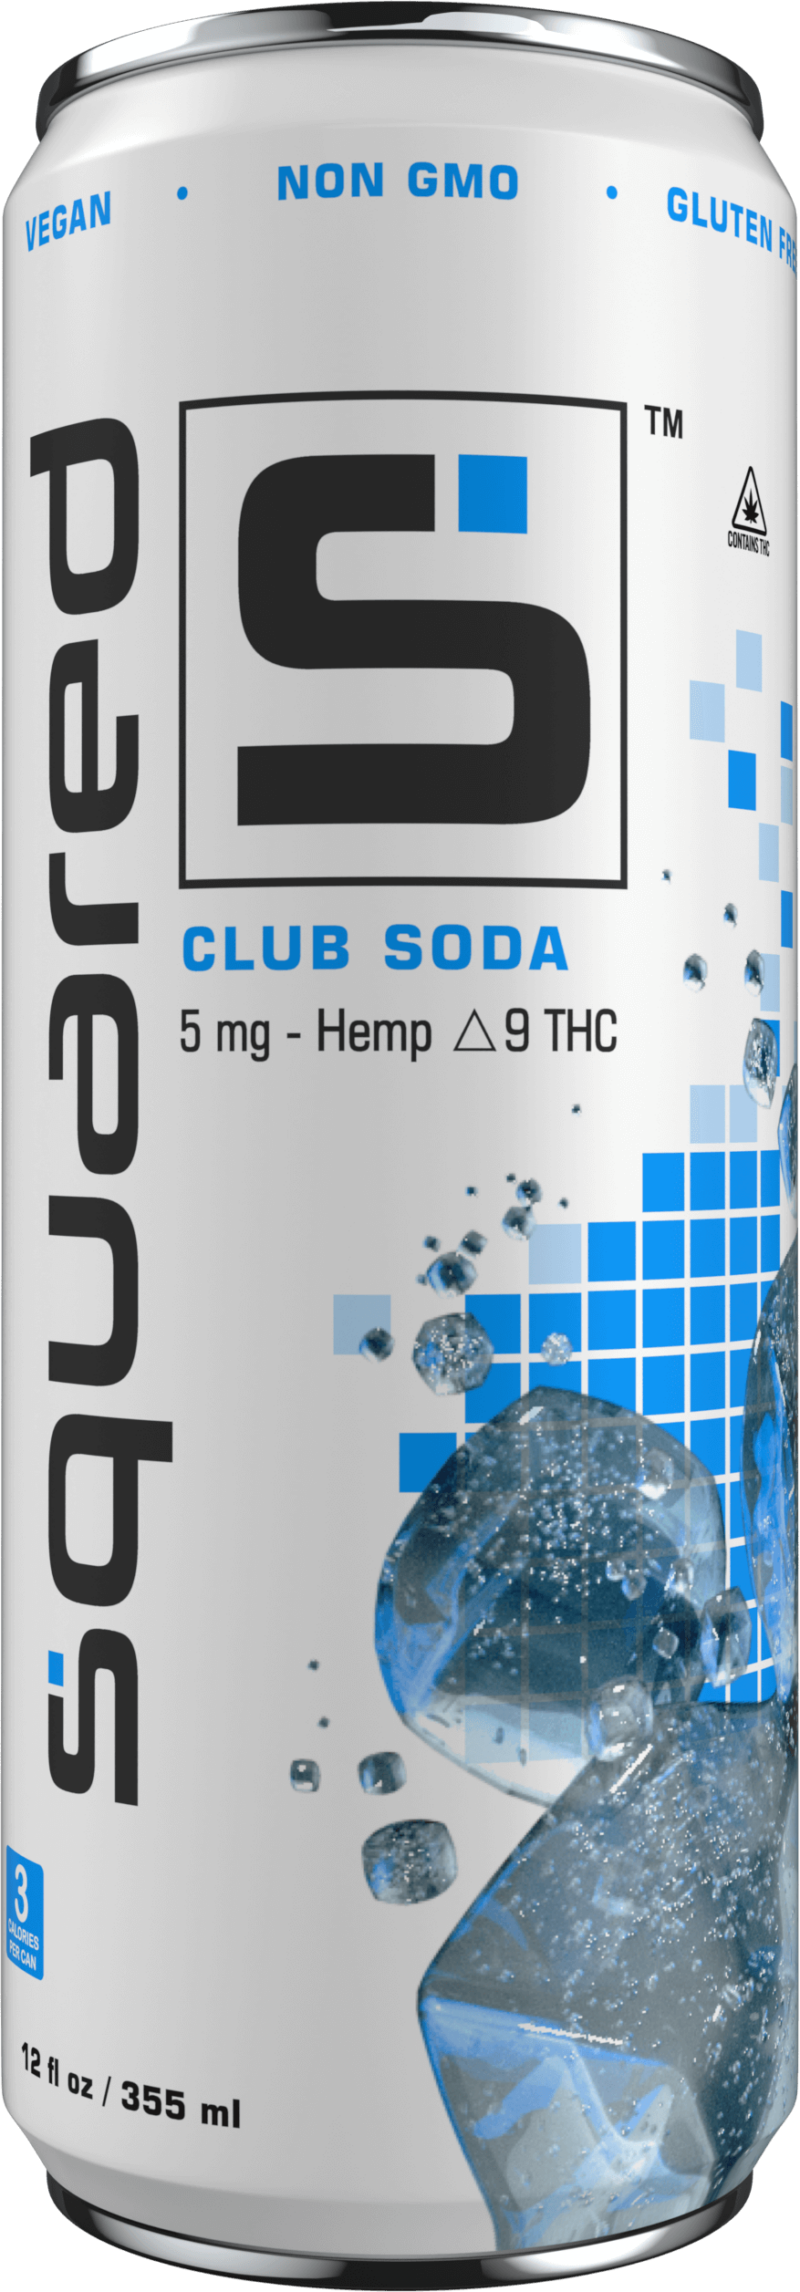 12 ounce sleek aluminum can of Club Soda by Squared